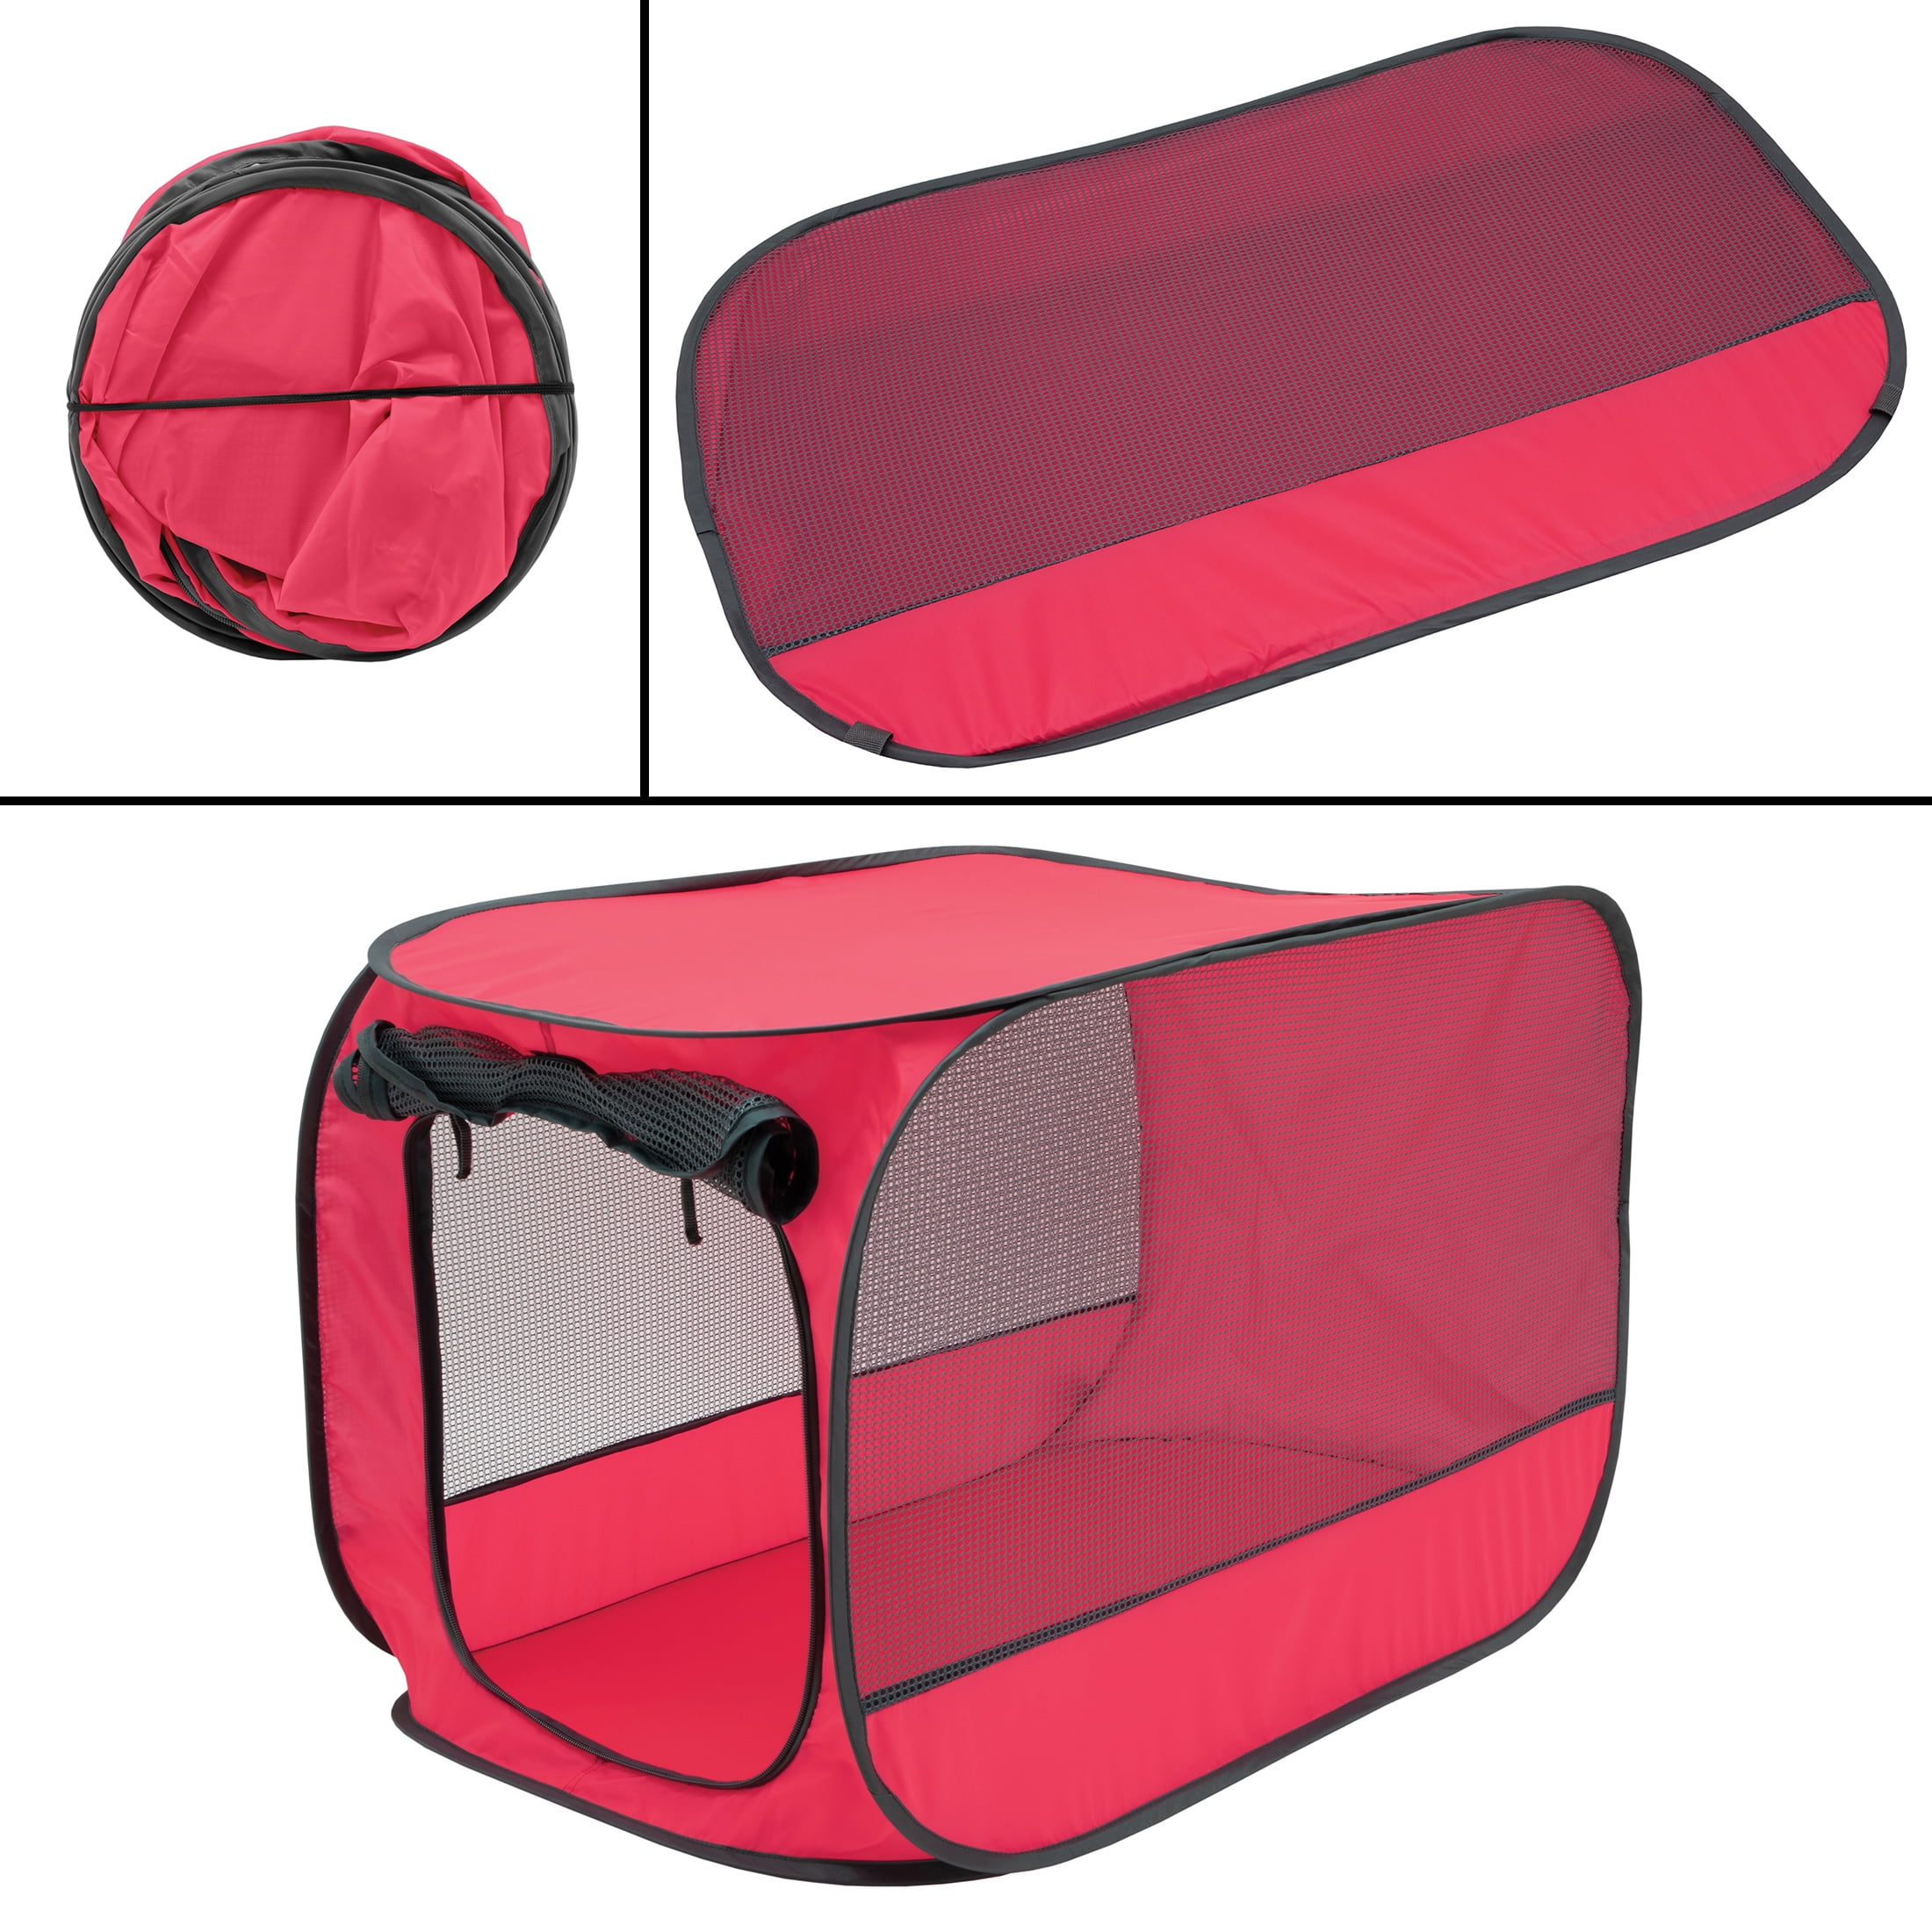 Vibrant Life Pet Kennel for Dogs, Hard-Sided Pet Carrier, Extra Small, 23in Length